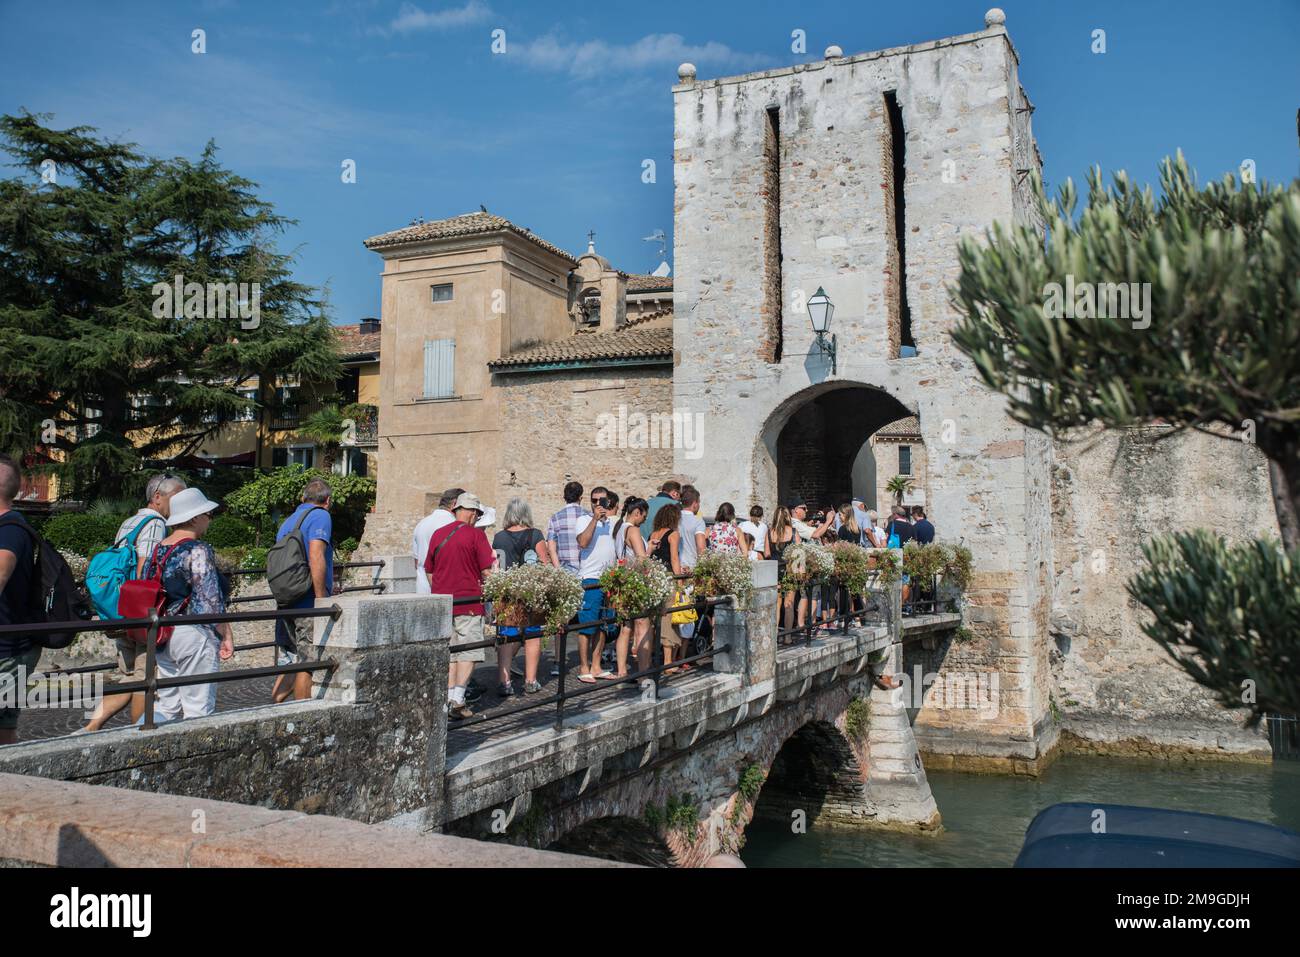 Tourists queueing to get into the castle in Sermione, Lake Garda, Northern Italy Stock Photo